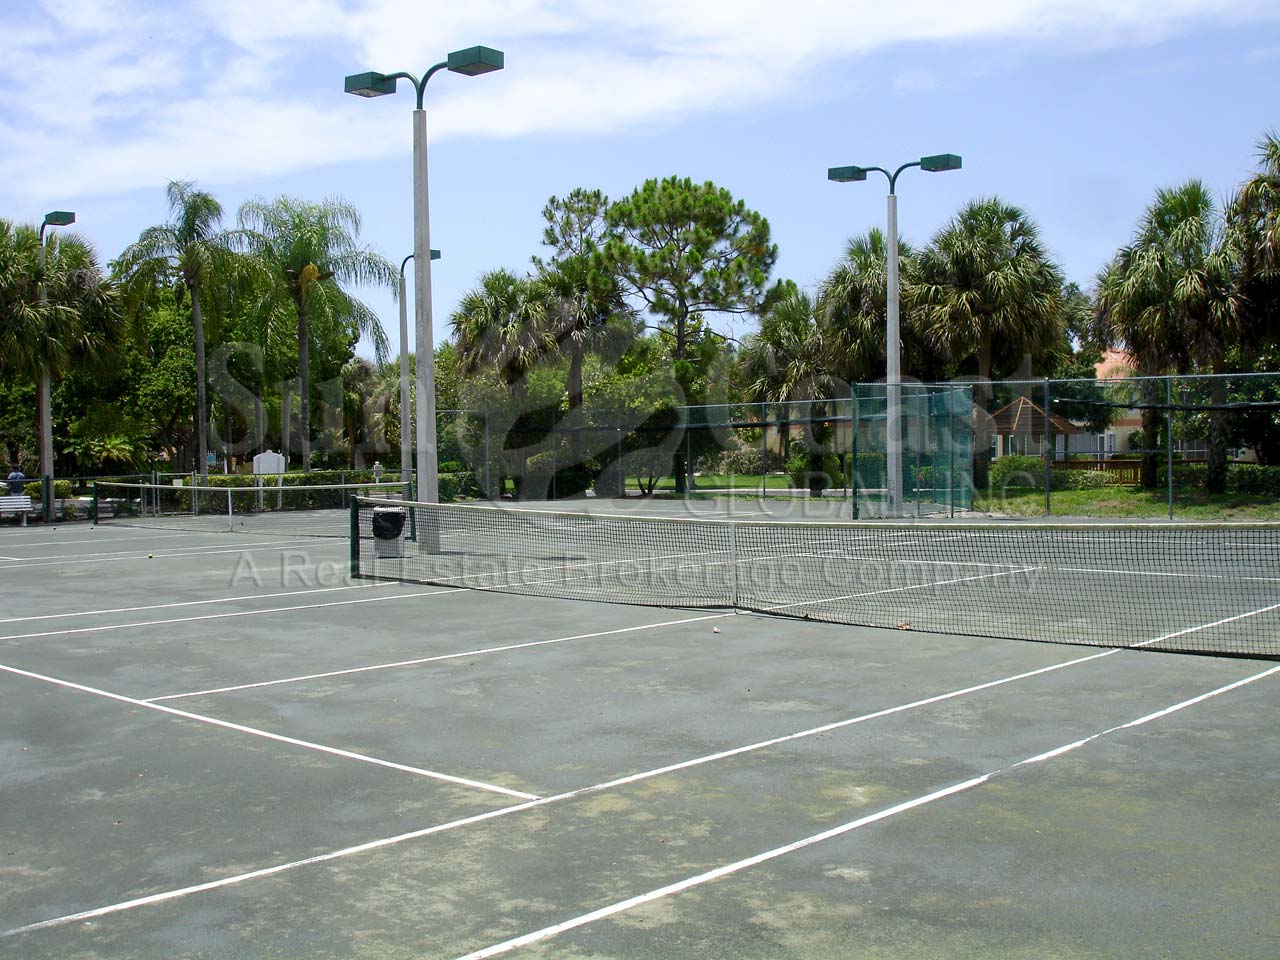 Pipers Grove tennis courts